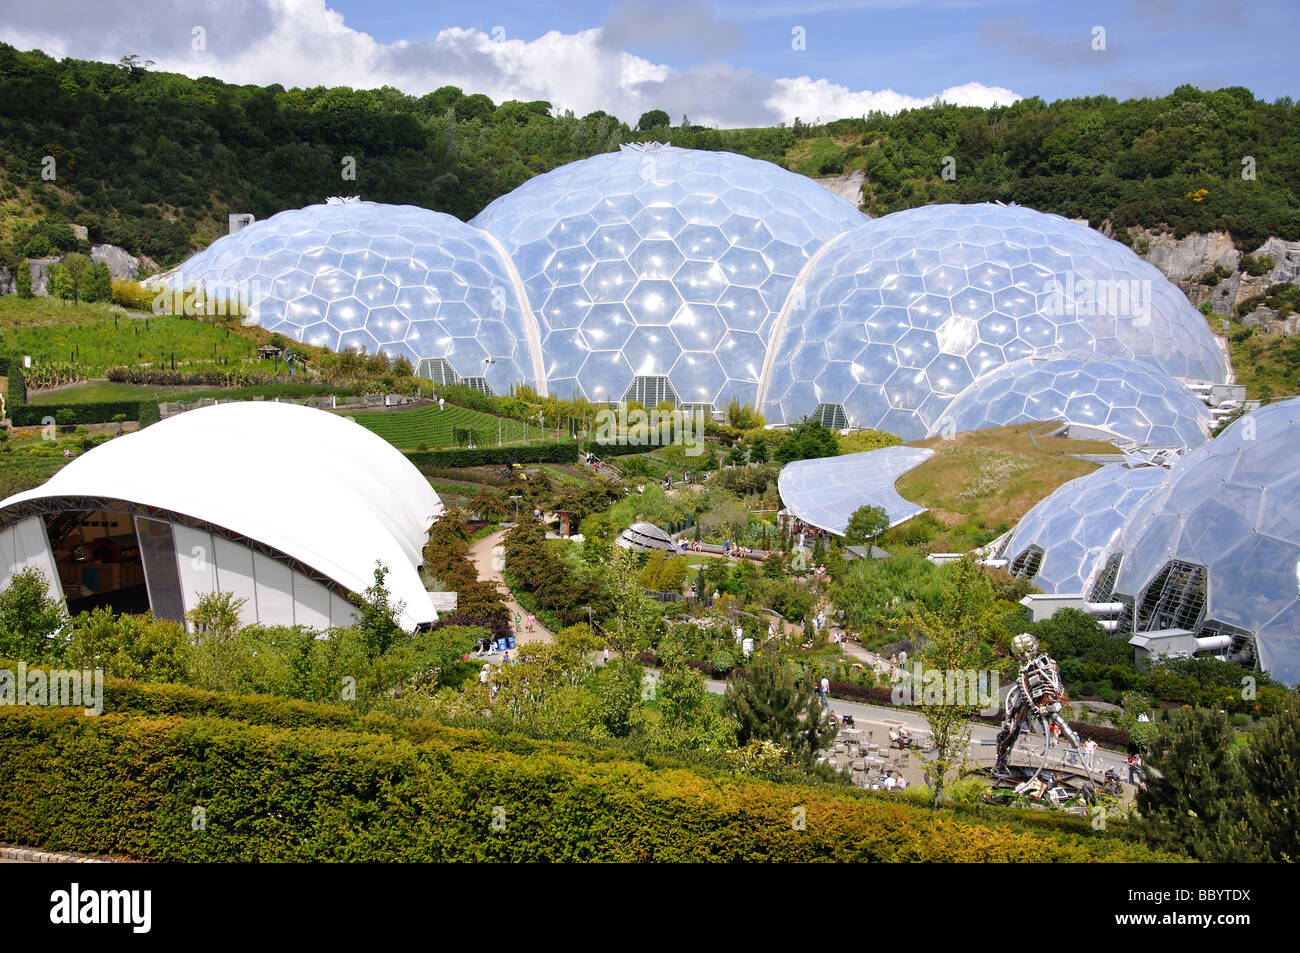 Eden Project, Bodelva, St Austell, Cornwall, Angleterre, Royaume-Uni Banque D'Images